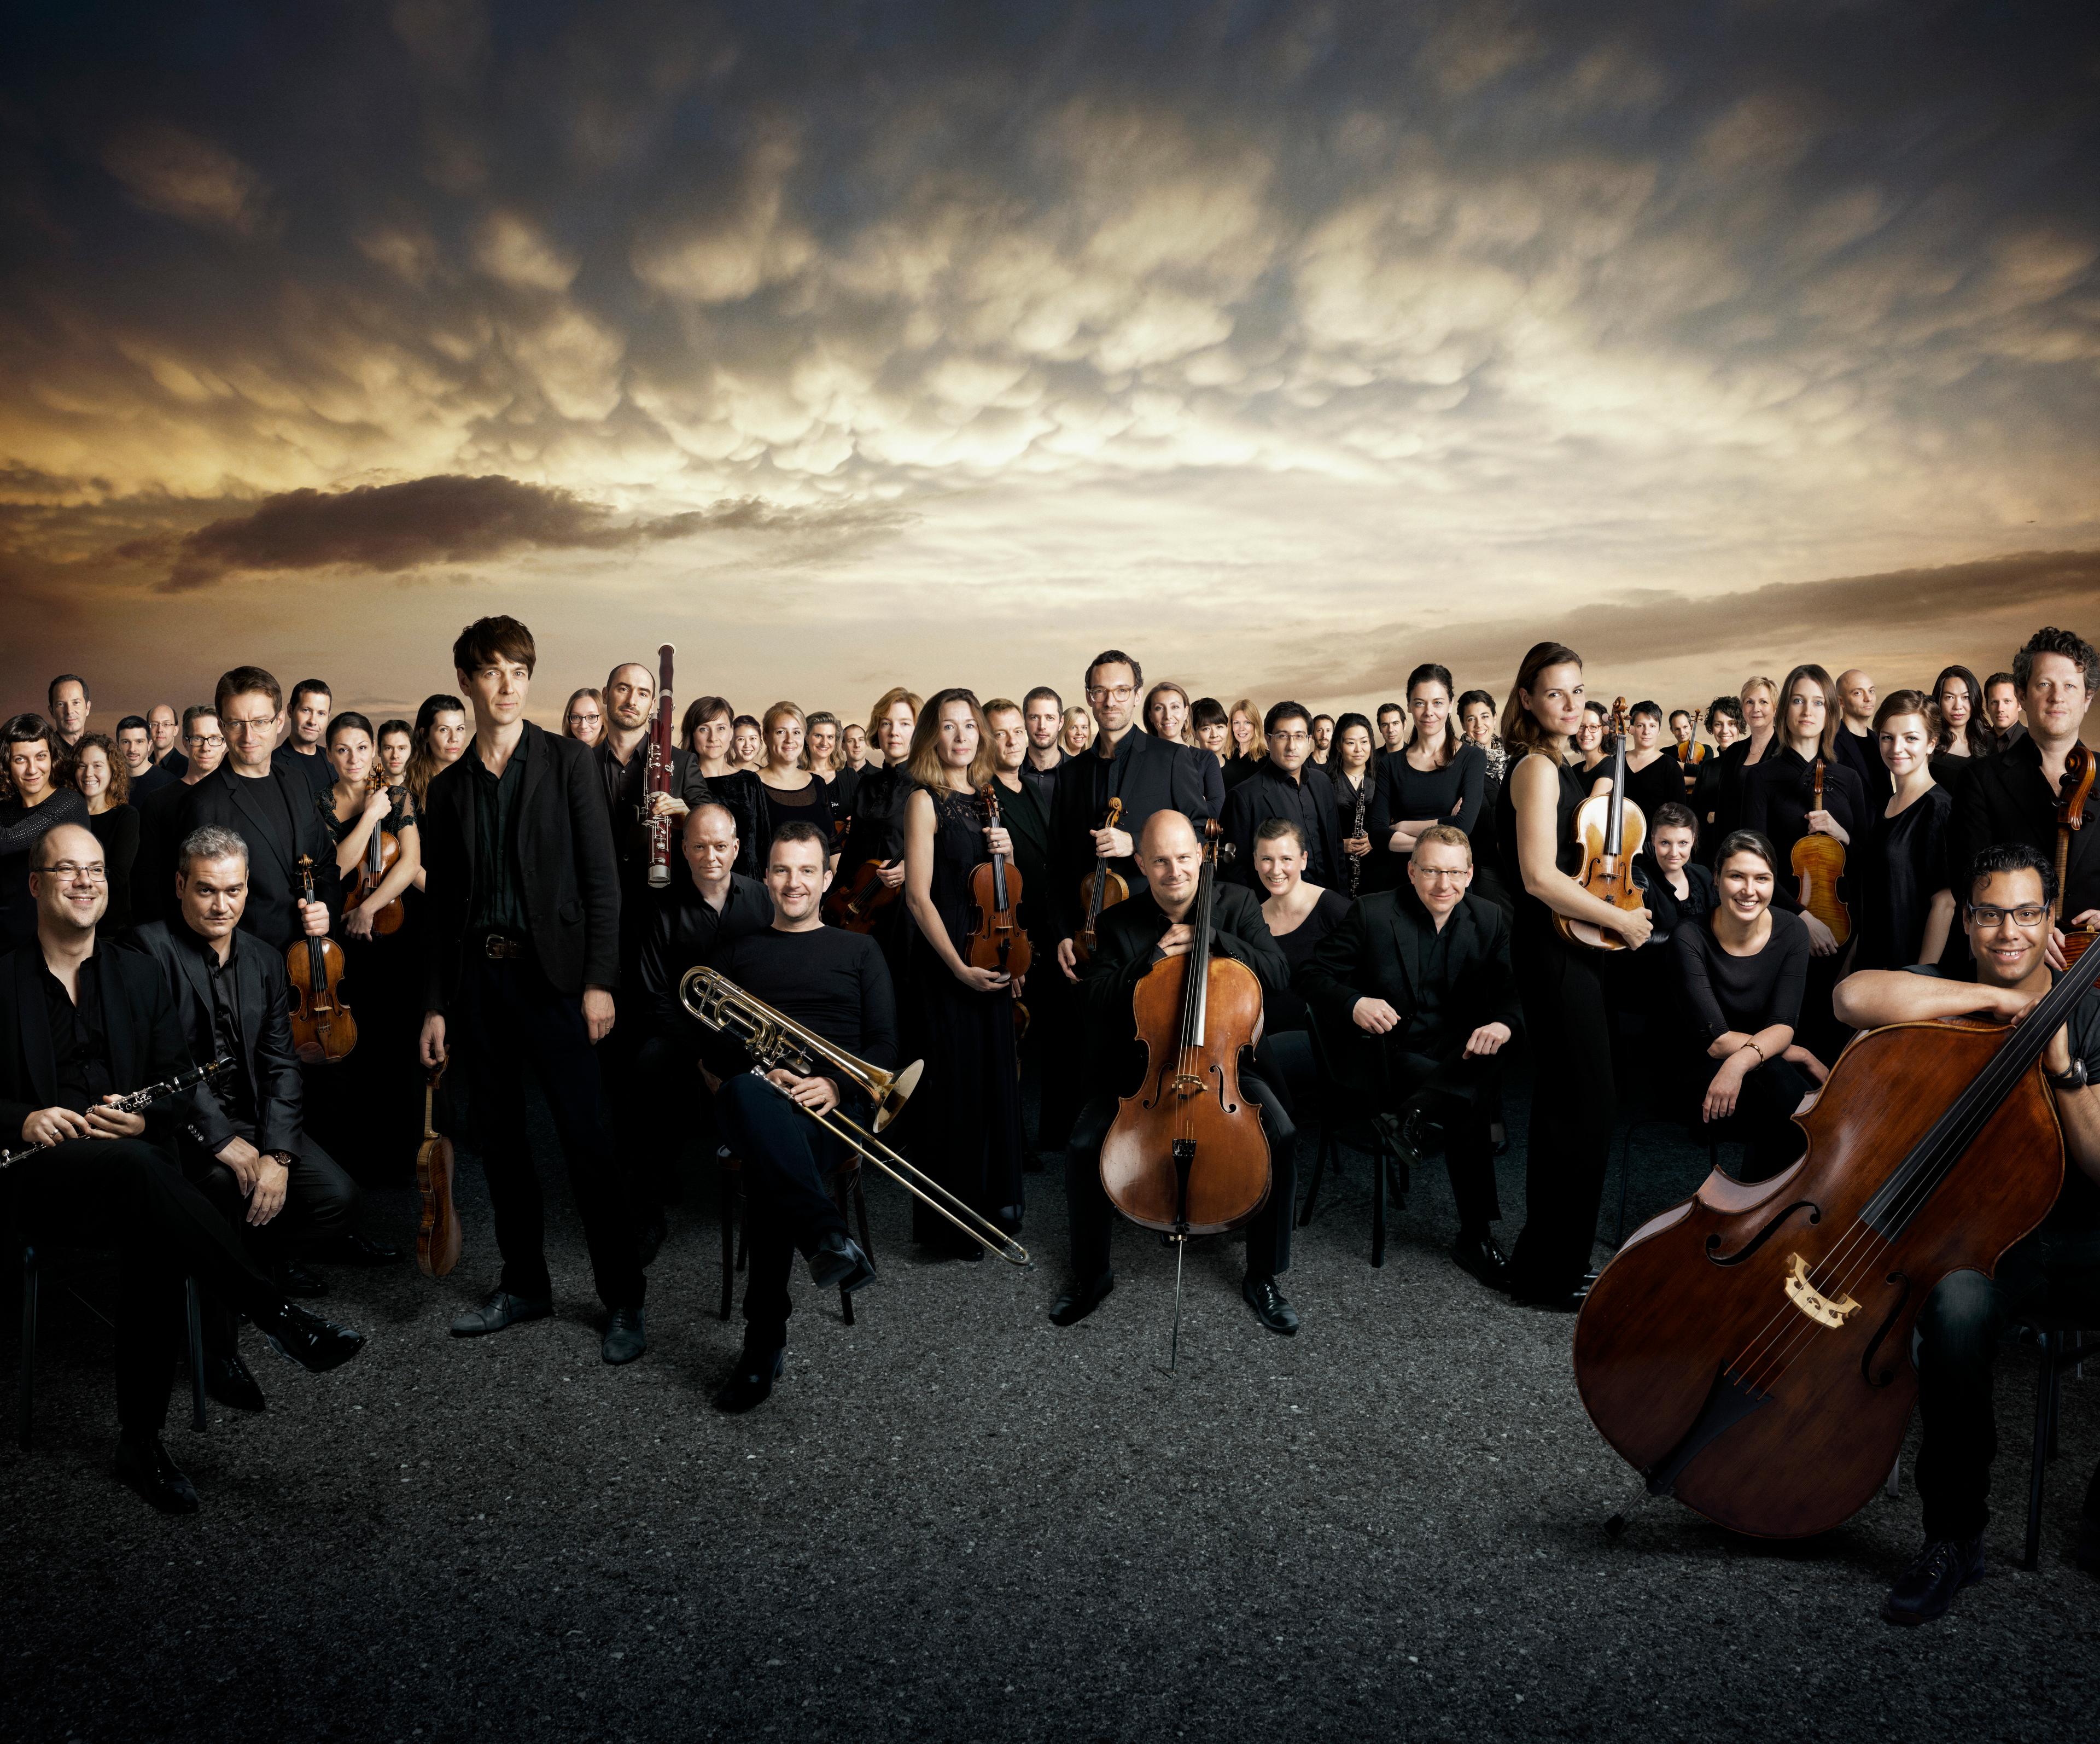 The orchestra wearing all black posed looking at the camera against a dramatic sky 